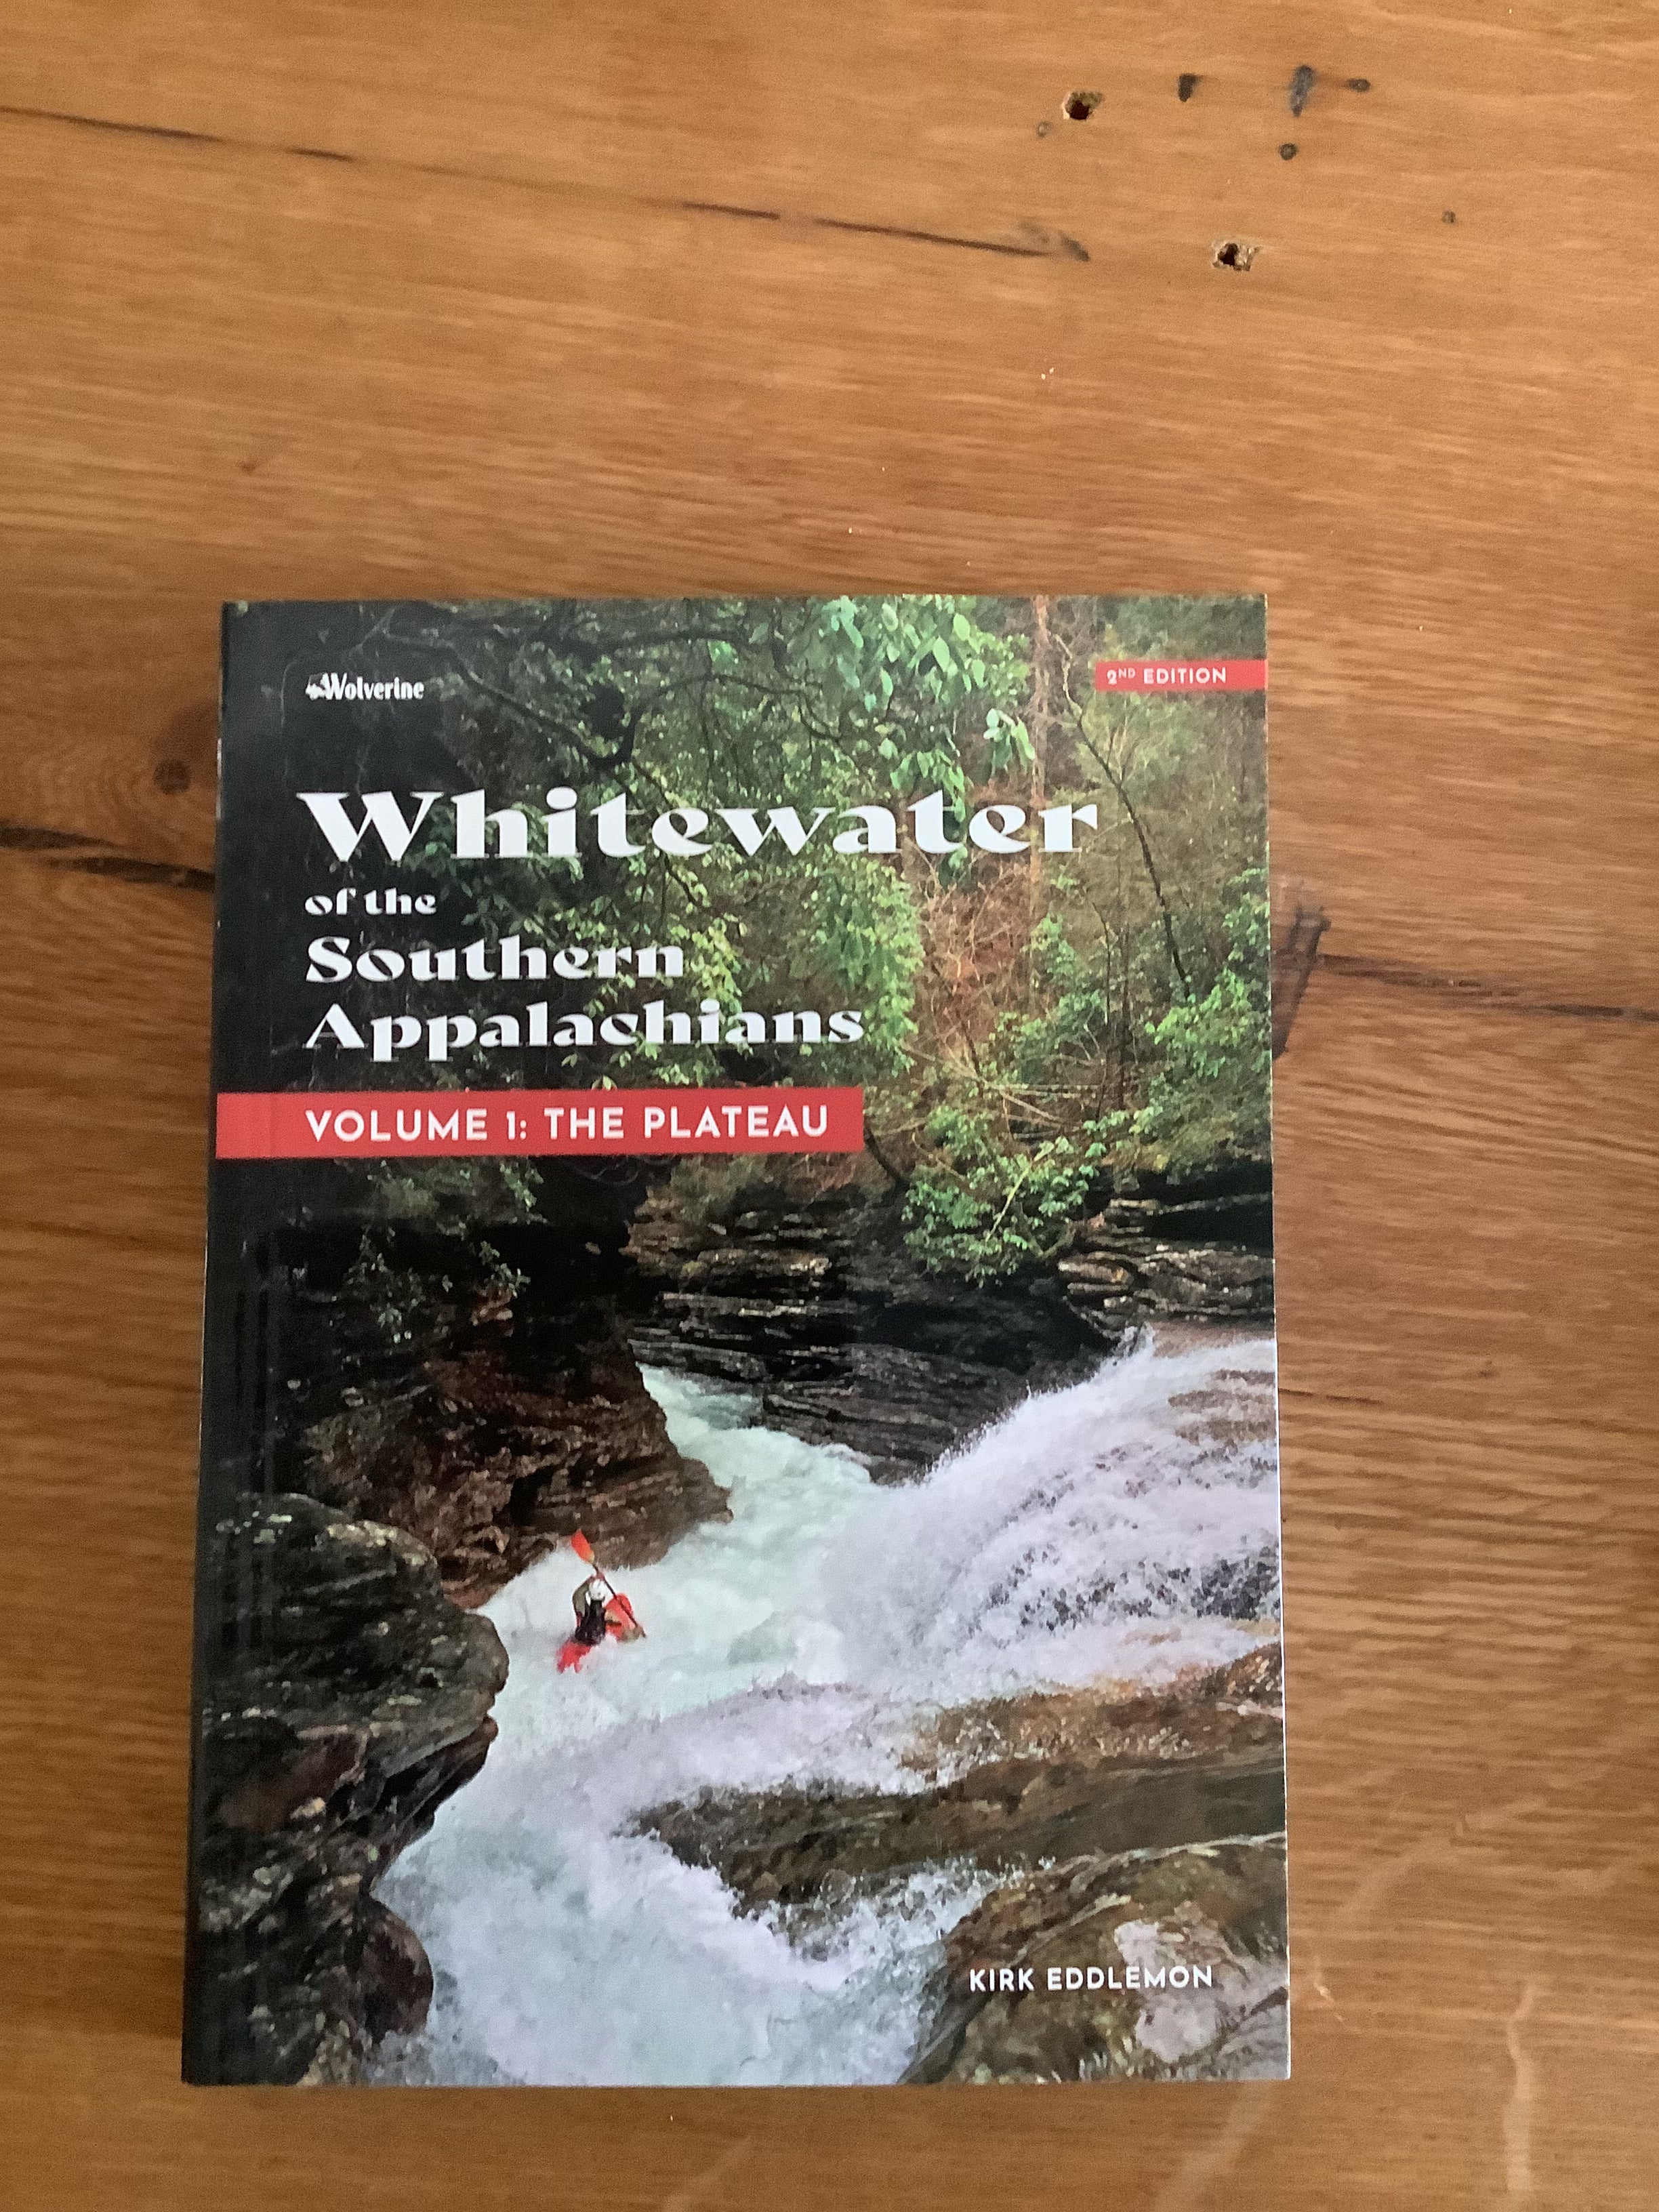 Whitewater of the Southern Appalachians Volume 1